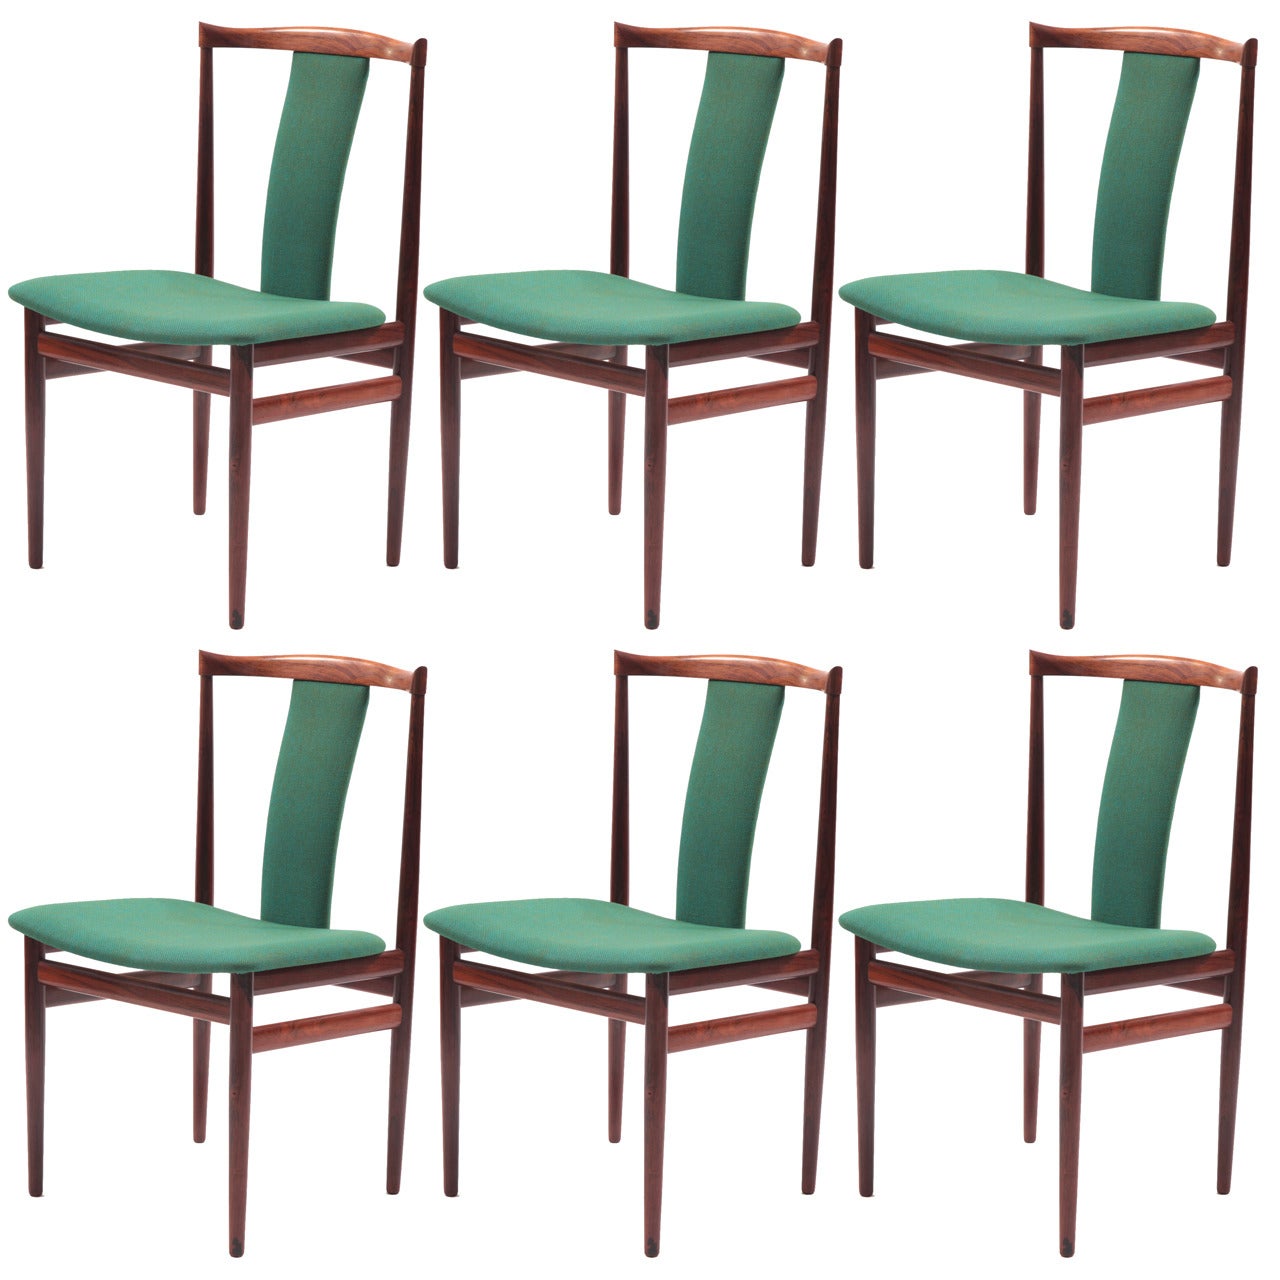 Six Sculptural Rosewood Dining Chairs